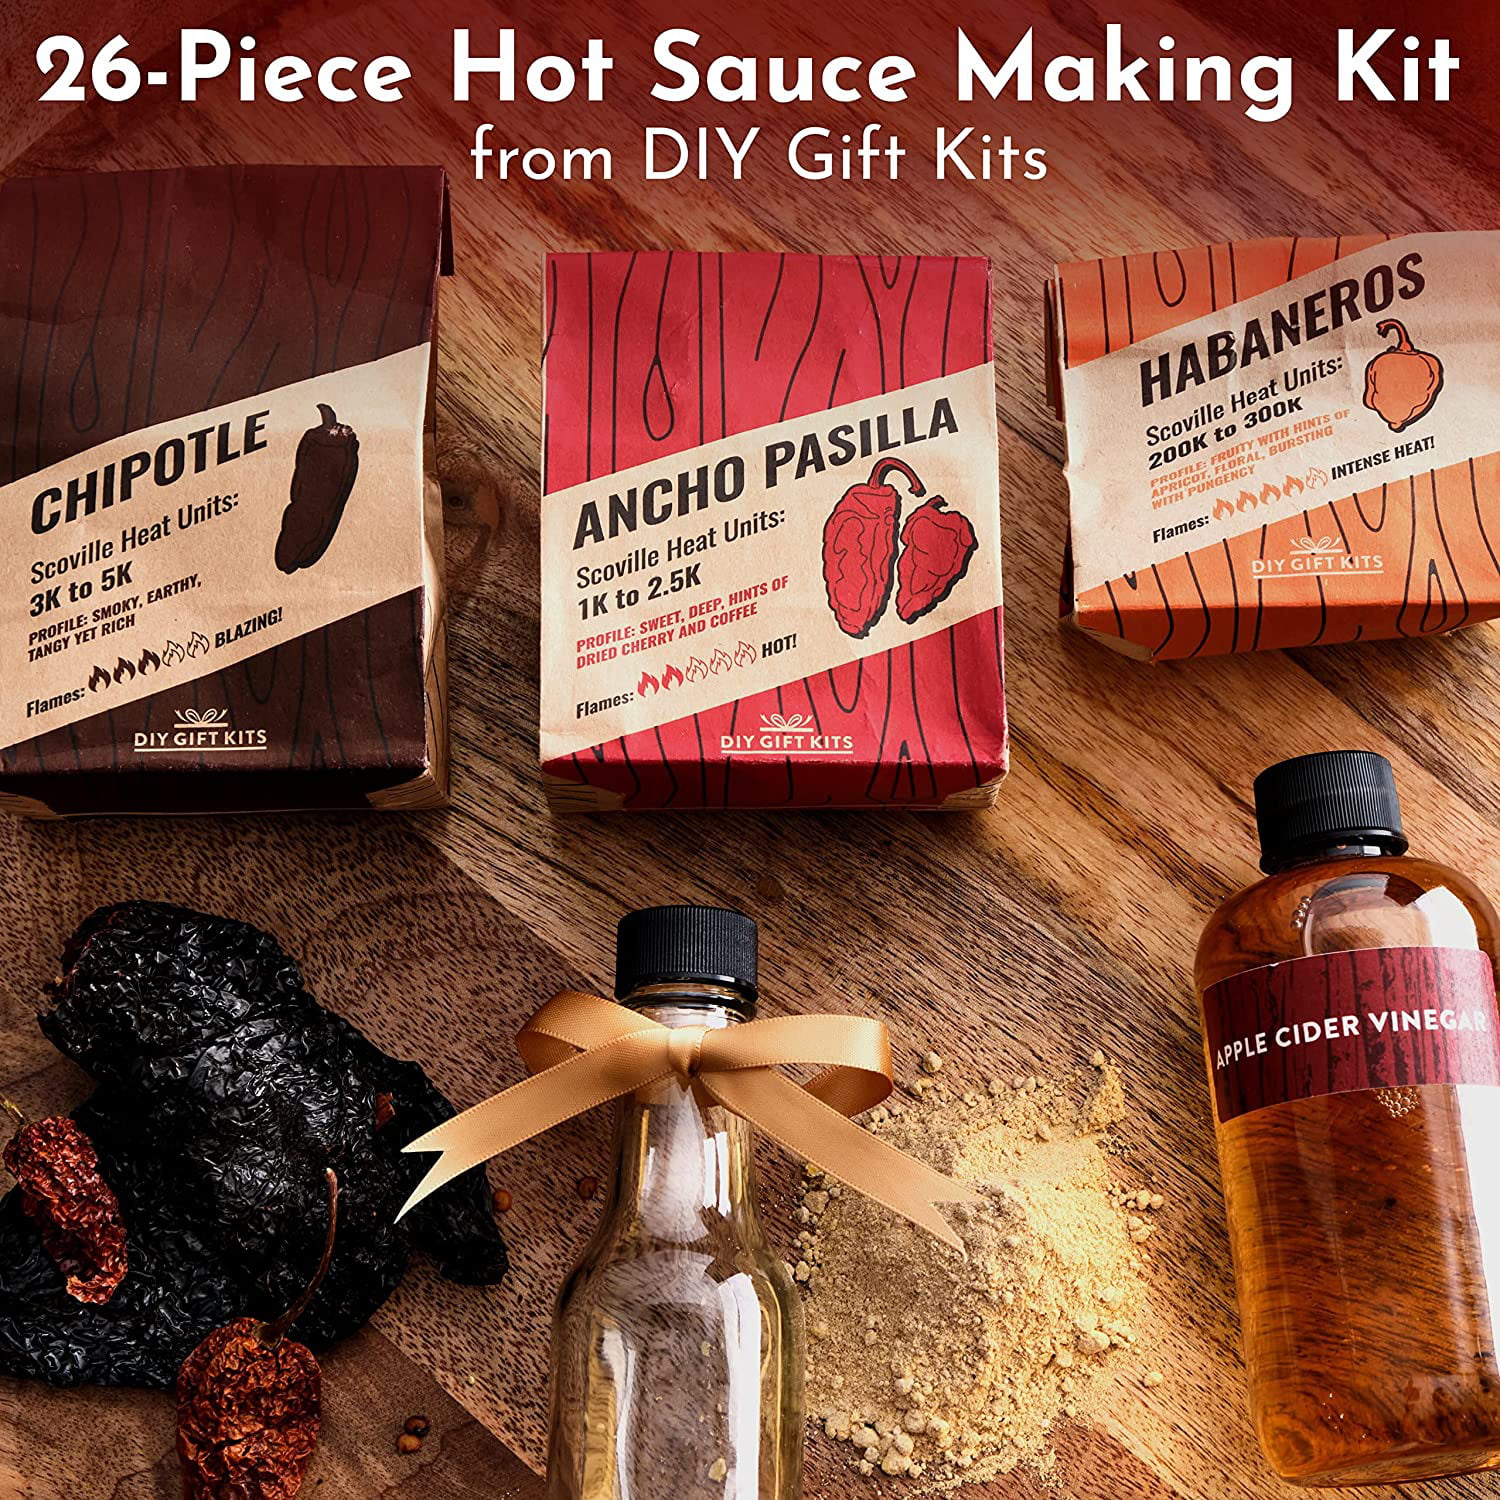  DELUXE DIY HOT SAUCE MAKING KIT Everything Included - Make  Your Own Hot Sauce w/Quality Ingredients Dried Hot & Spicy Peppers, 6  Unique Recipes, Glass Bottles, design labels, Best Gift